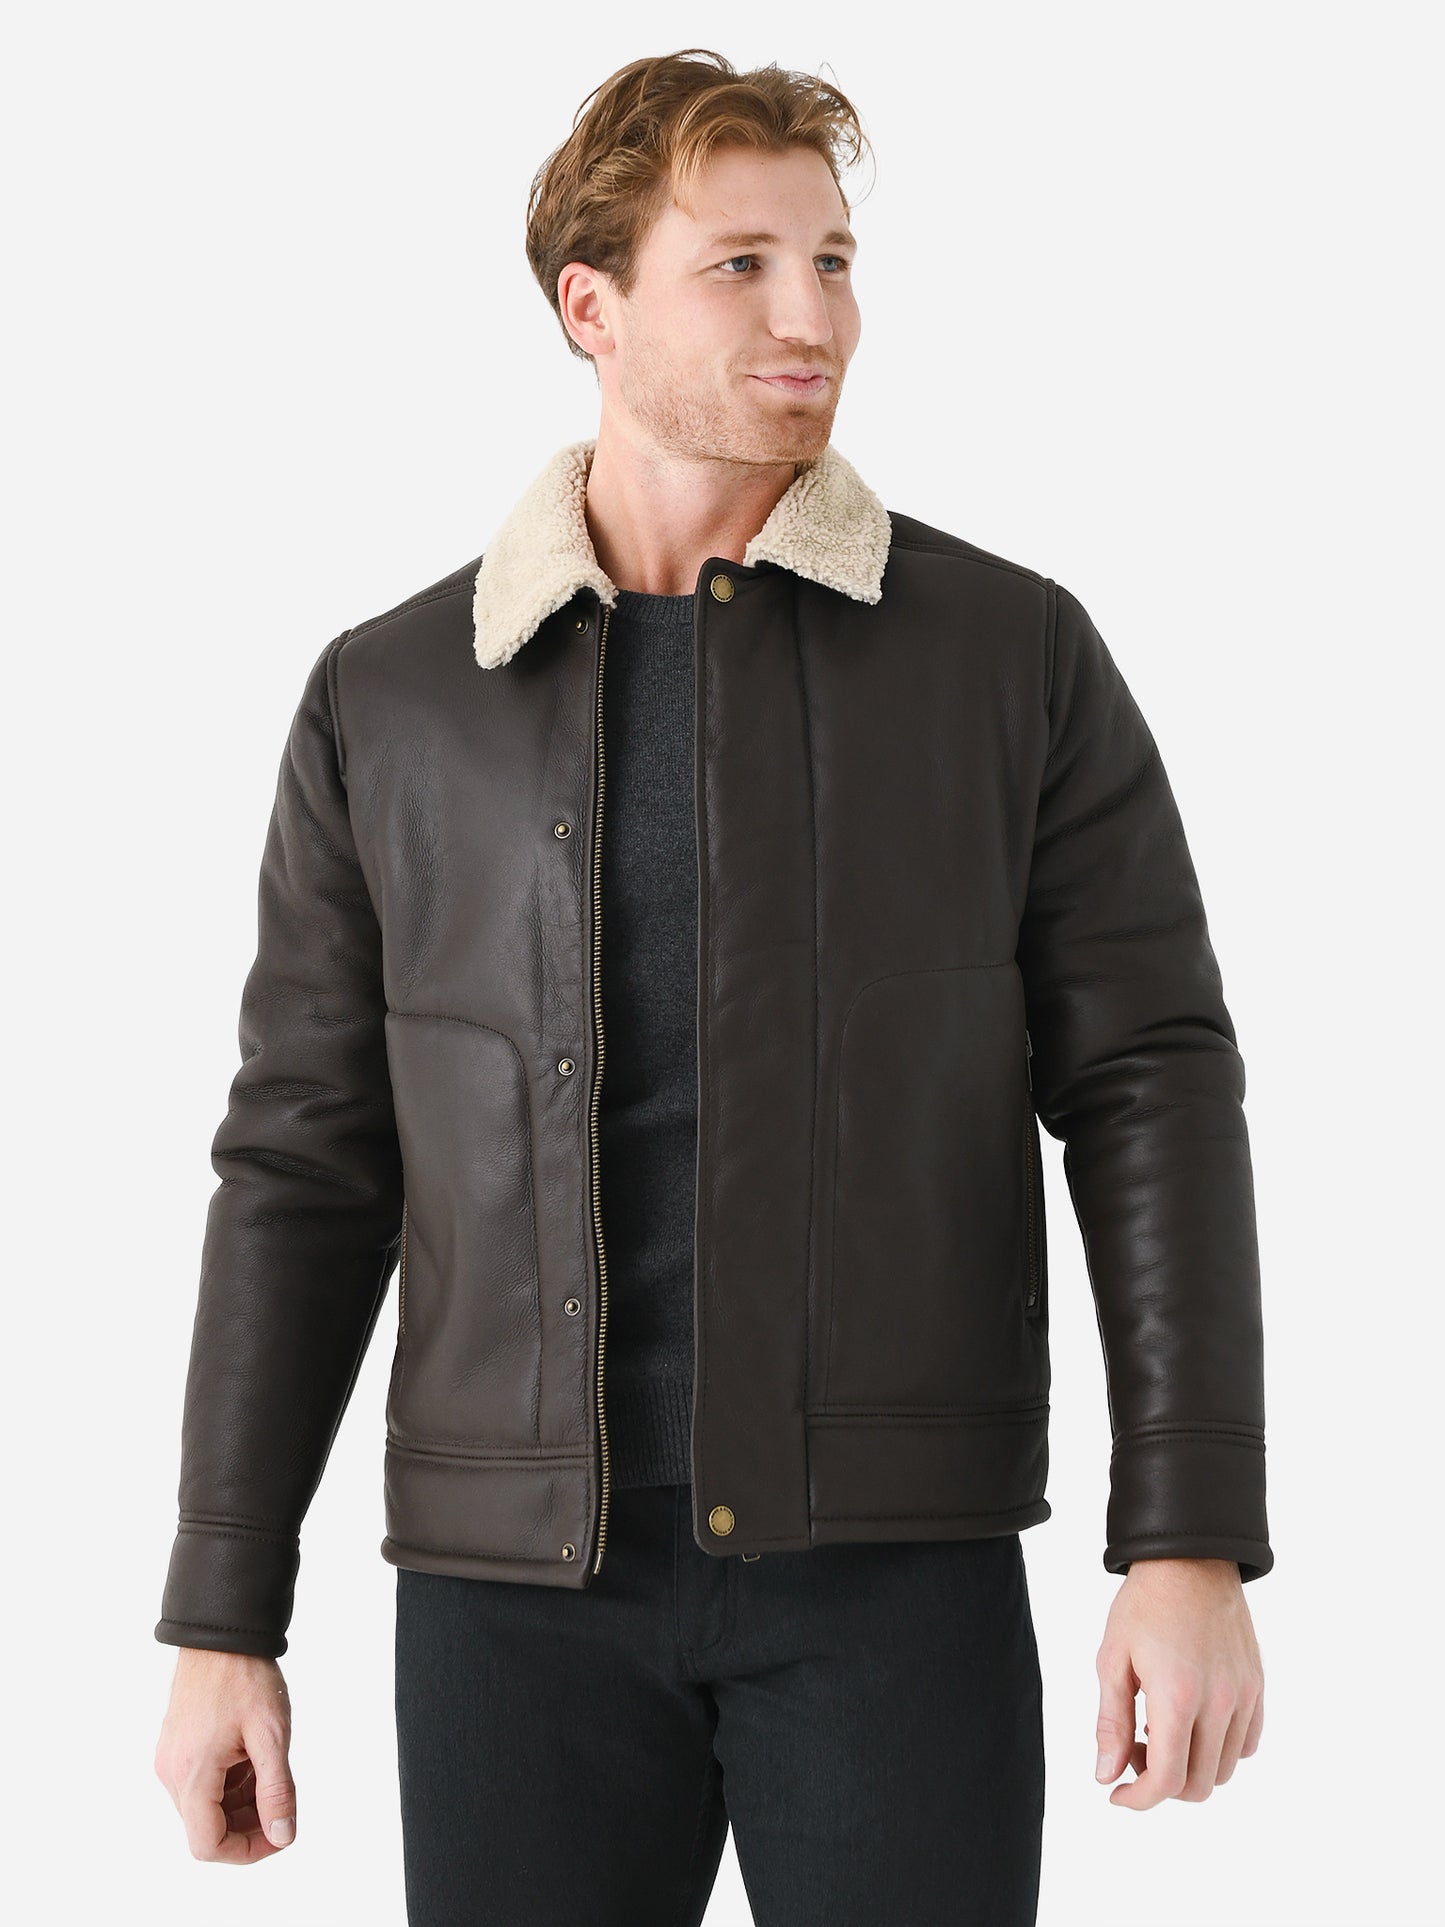 Rodd And Gunn Men's Arrowtown Shearling Leather Jacket